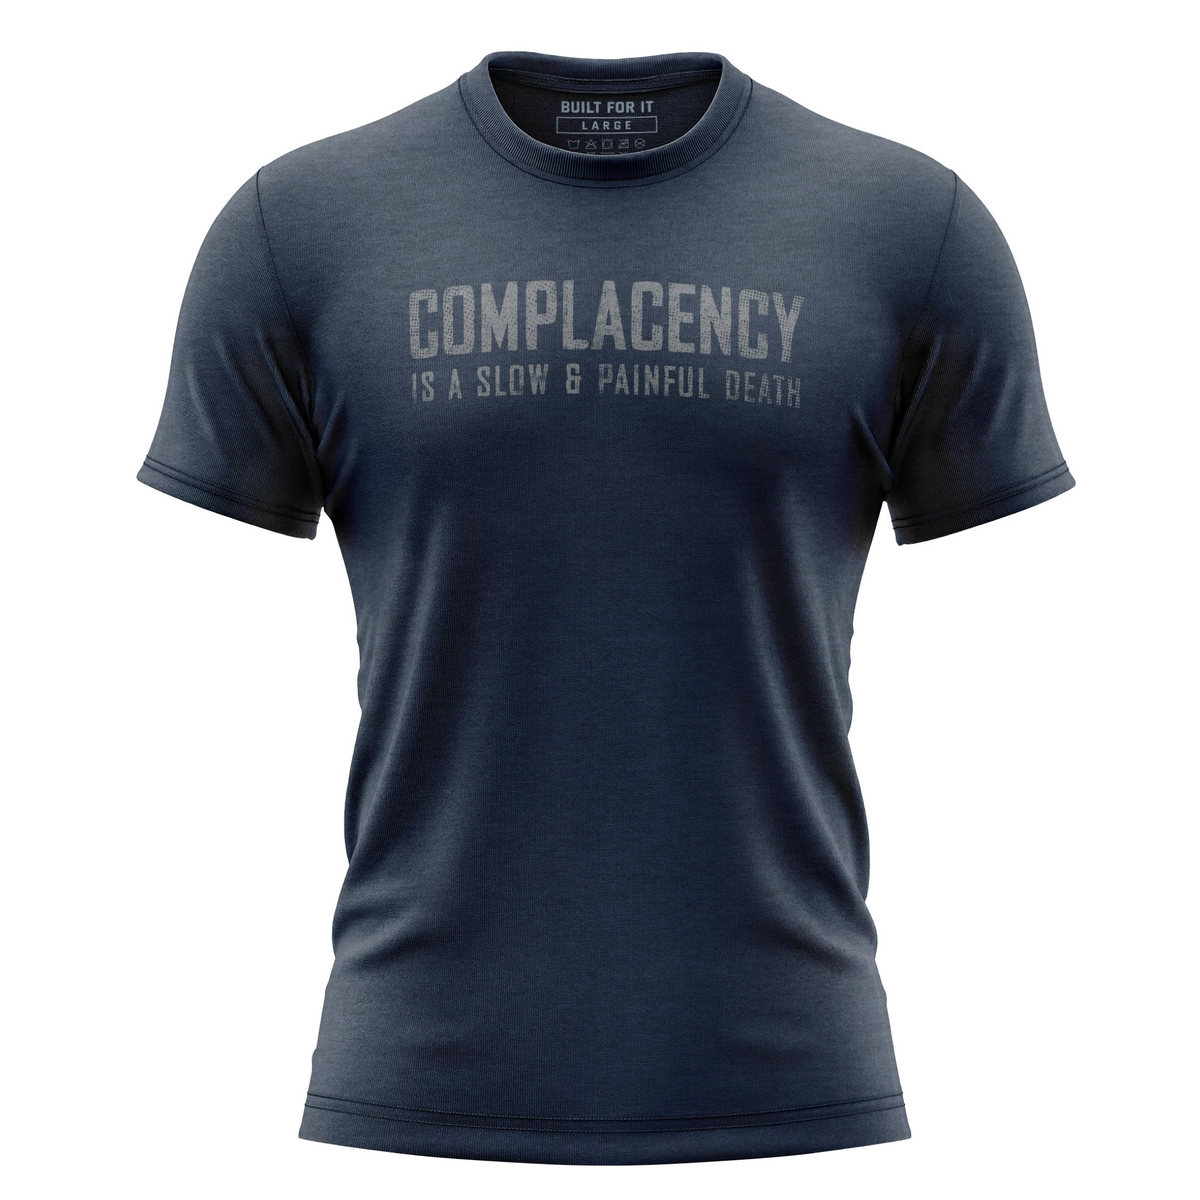 Complacency Is A Slow & Painful Death T-Shirt